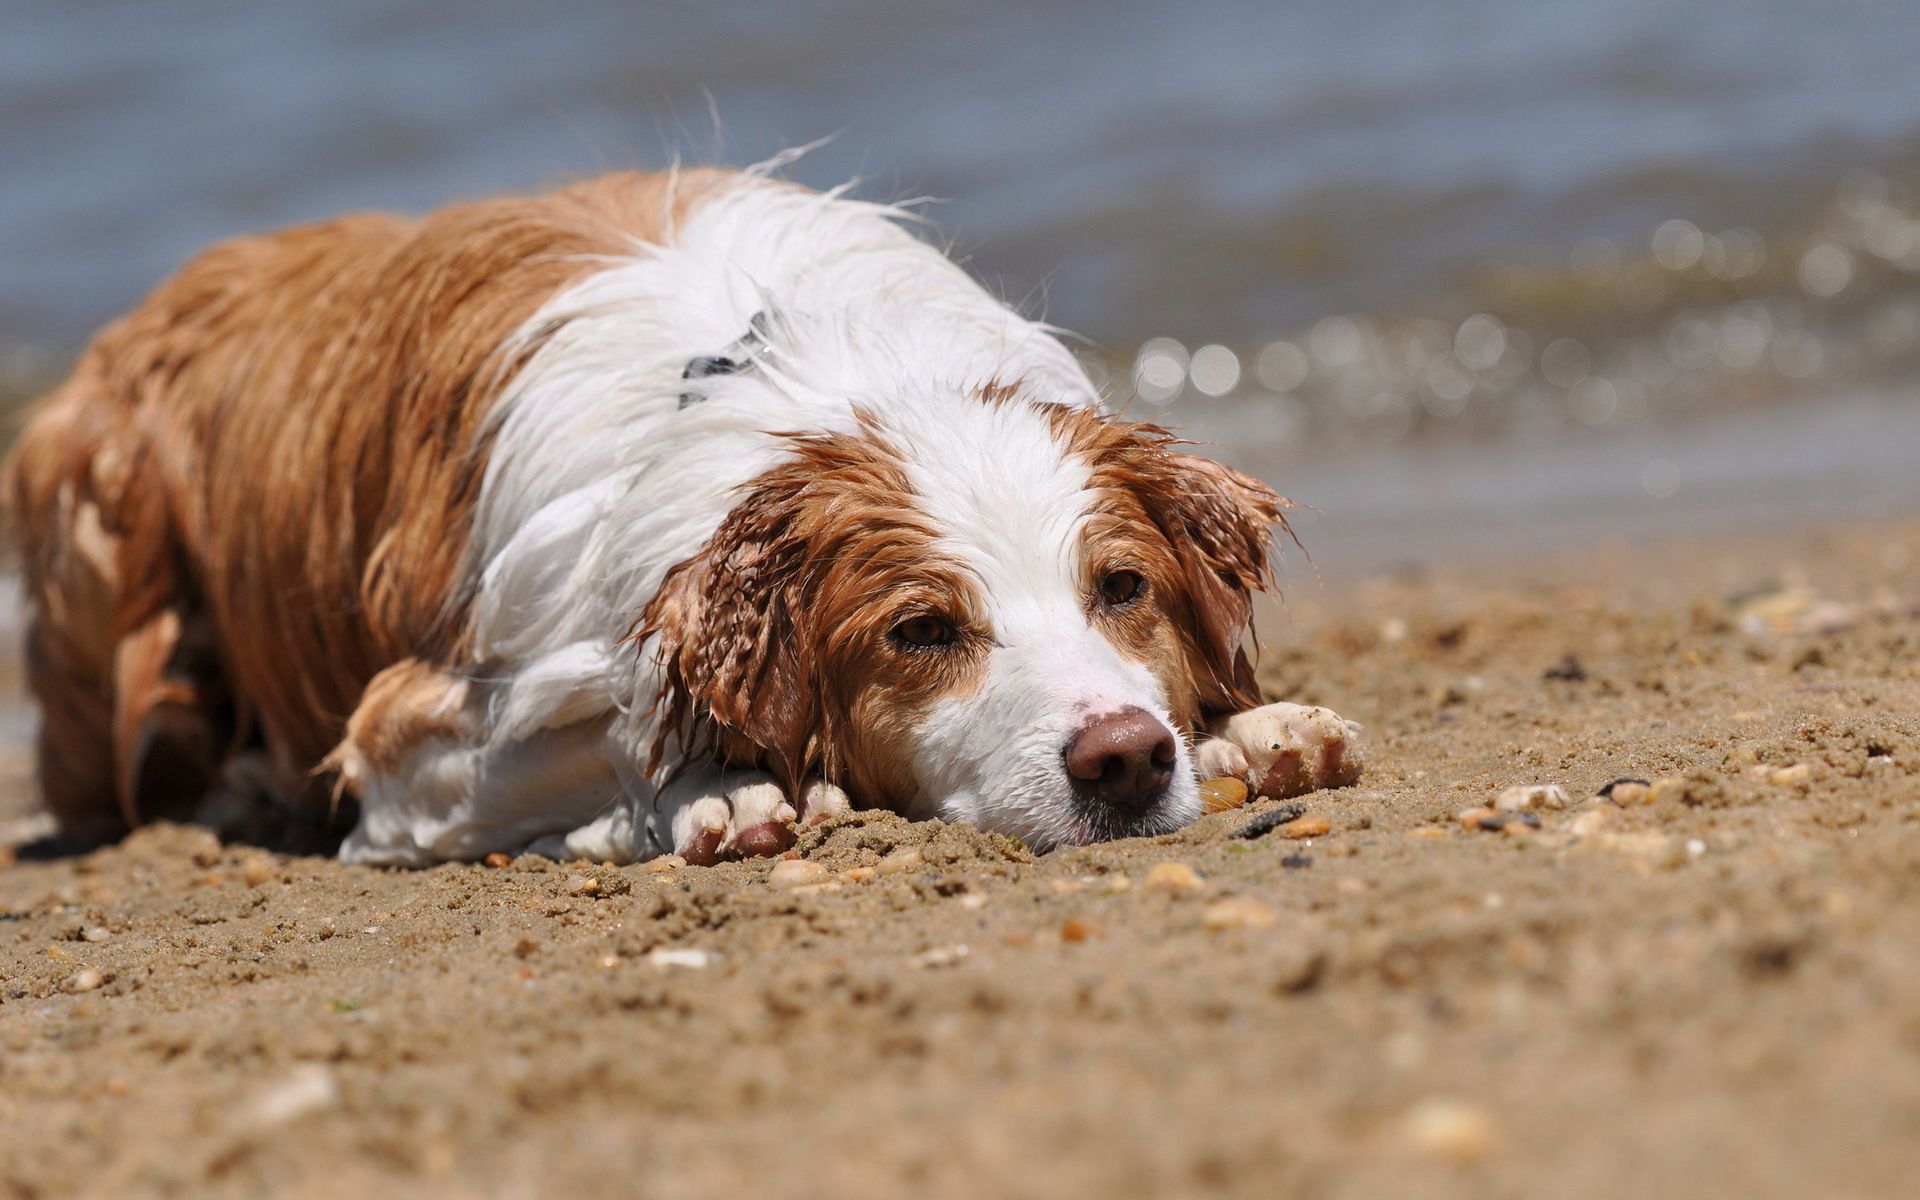 Wet And Tired Dog On The Beach Wallpaper